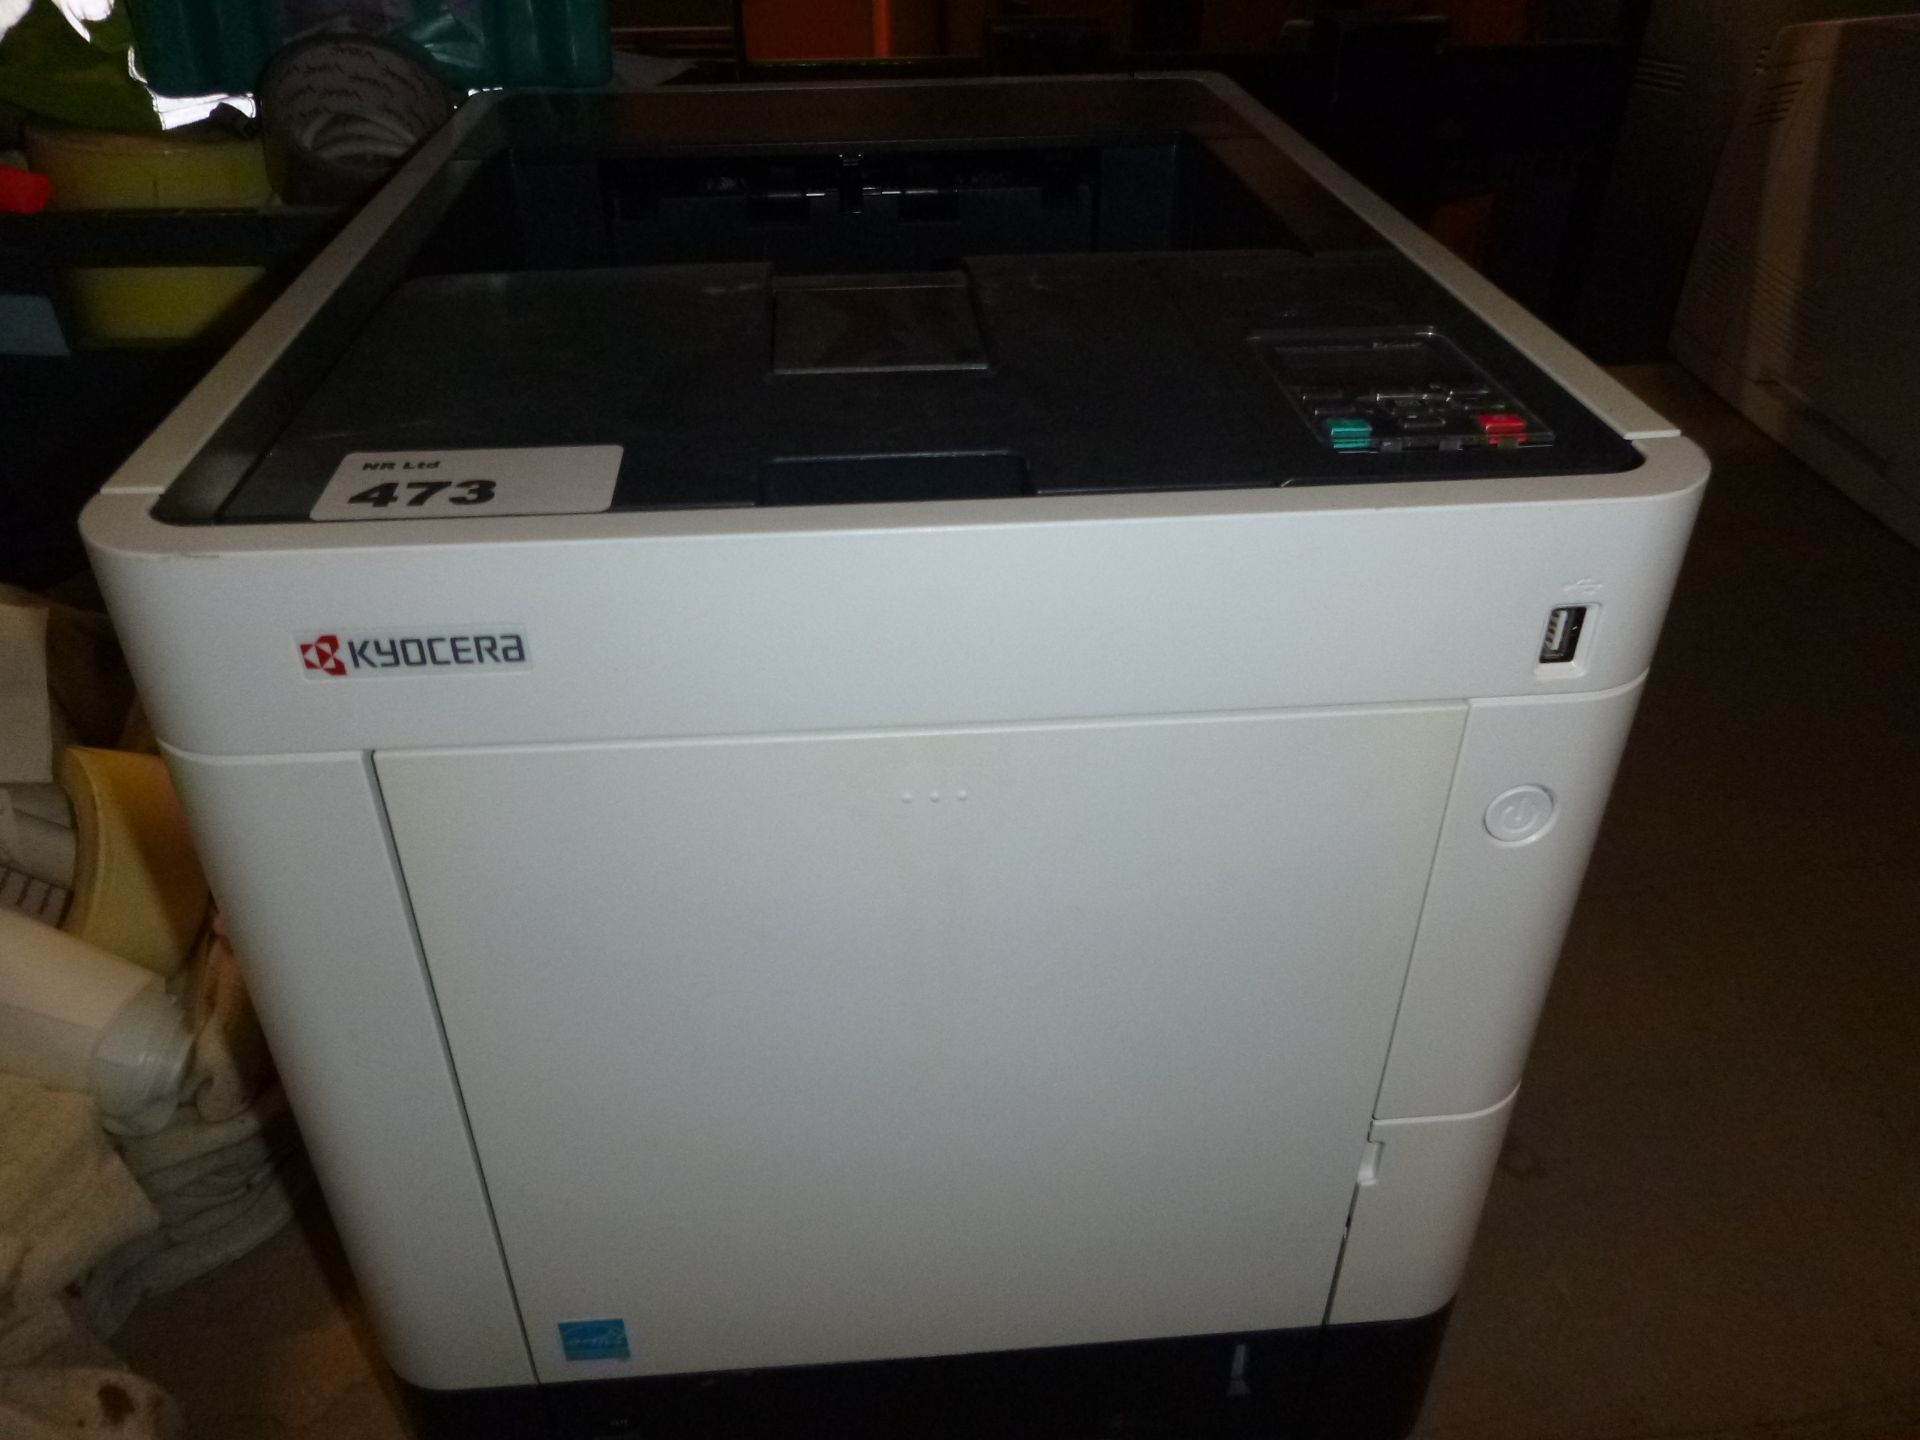 KYOCERA ECOSYS P6130CDN NETWORK COLOUR LASER PRINTER WITH TEST PRINT